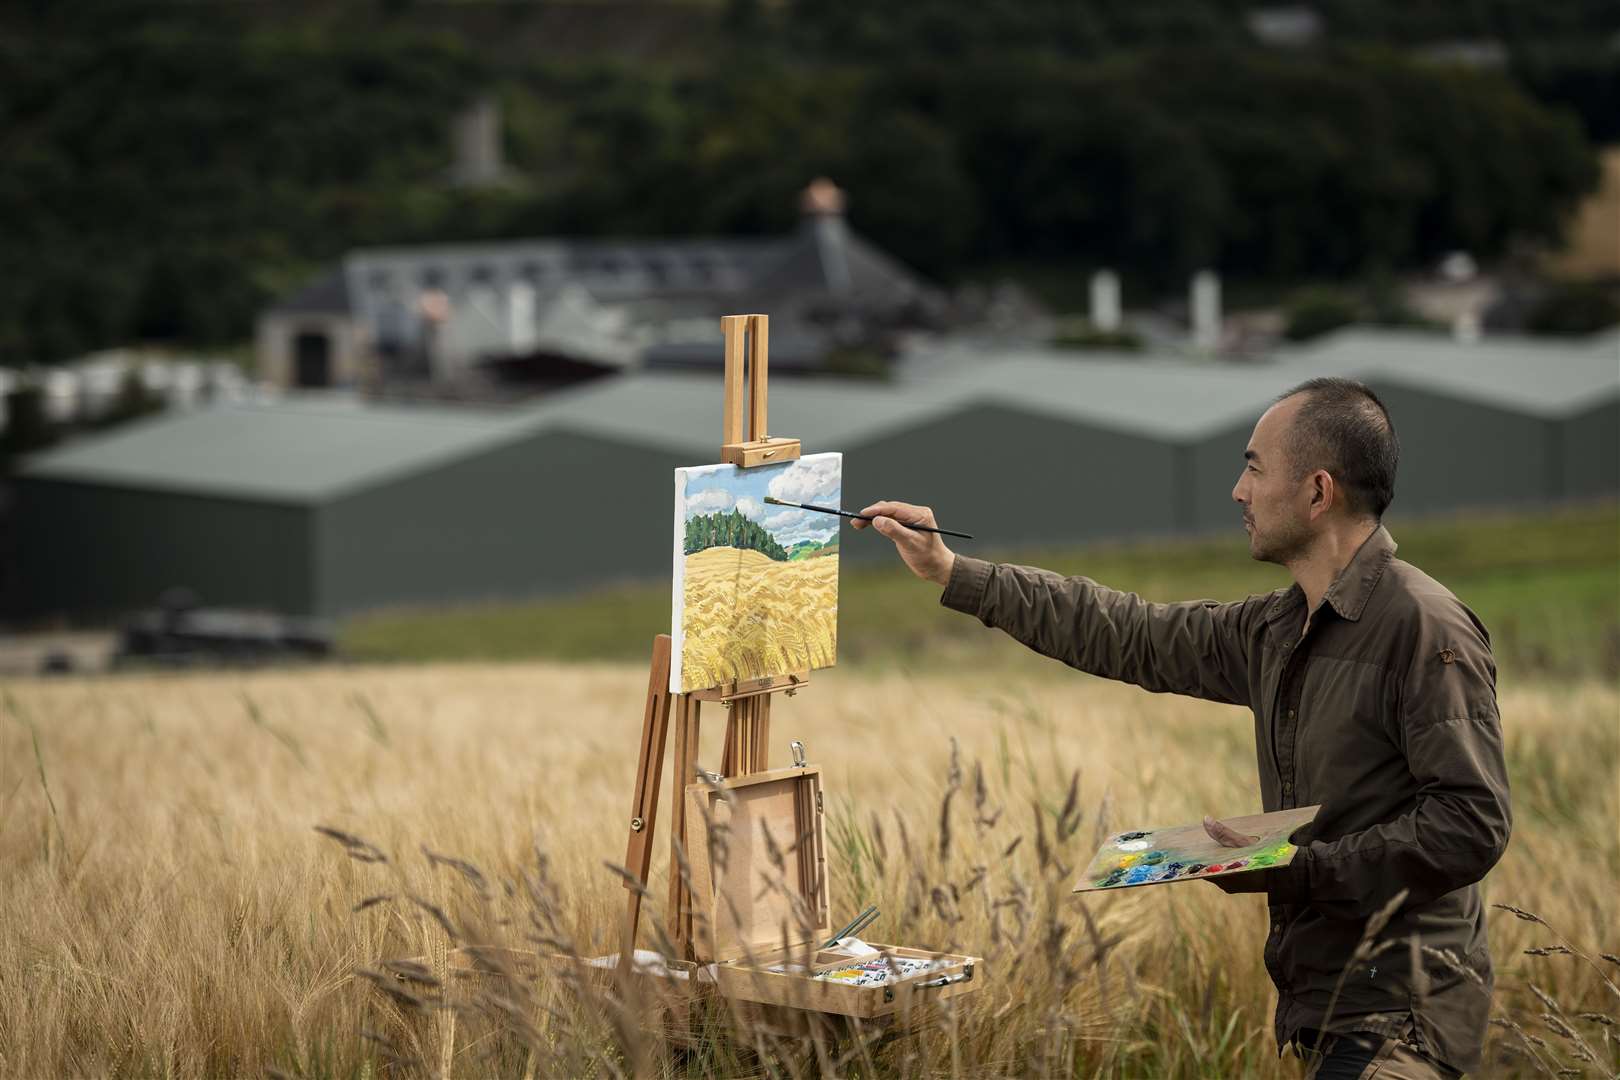 Chinese artist Guo Haiqiang painting in barley fields above Glenfiddich Distillery in Dufftown.